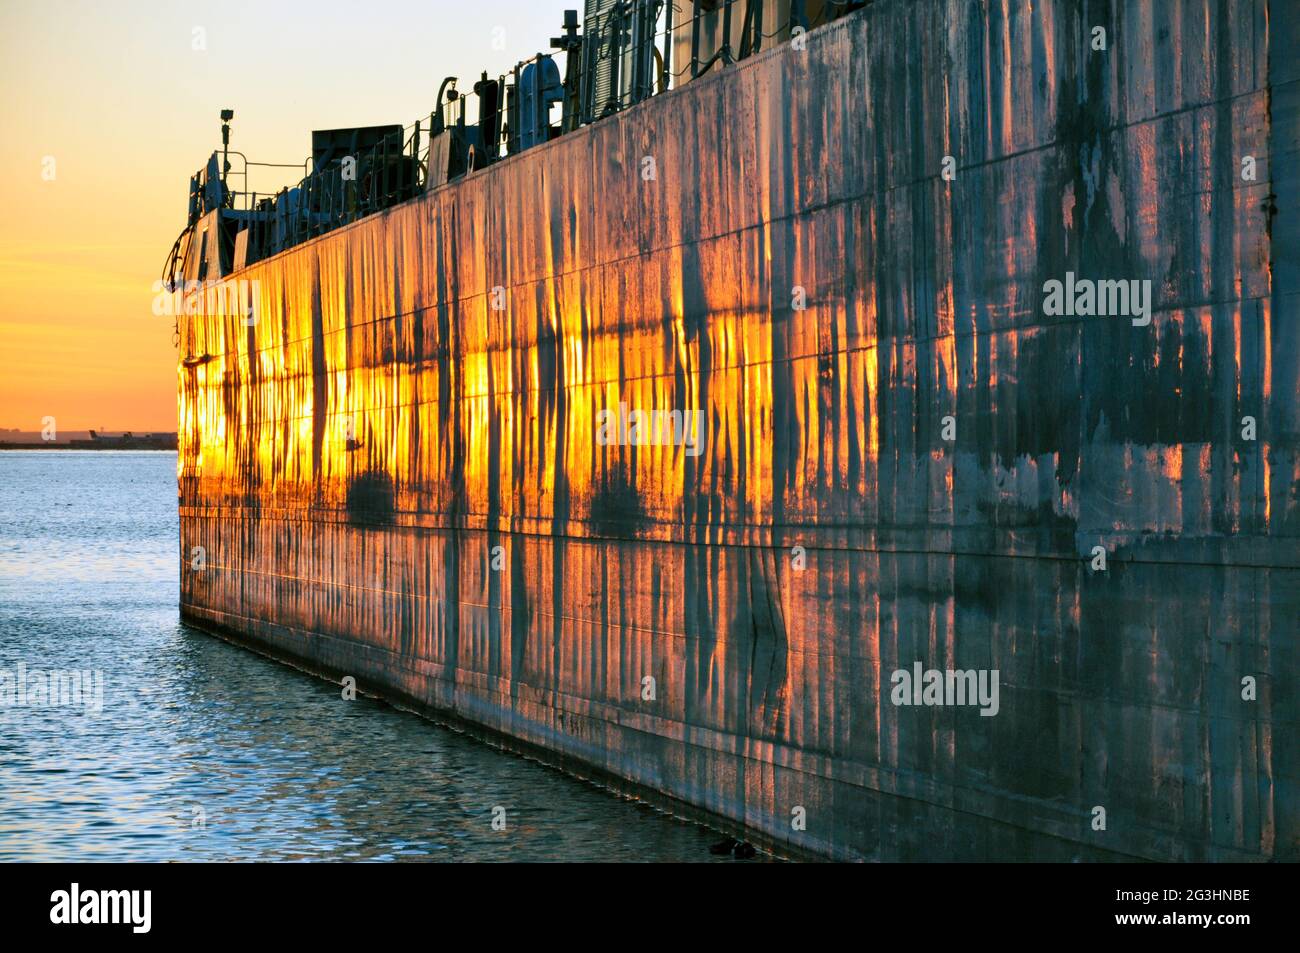 A bulk carrier laker ship is seen in the port of Toronto, glowing a fiery orange at sunset. Concept of maritime shipping. Stock Photo